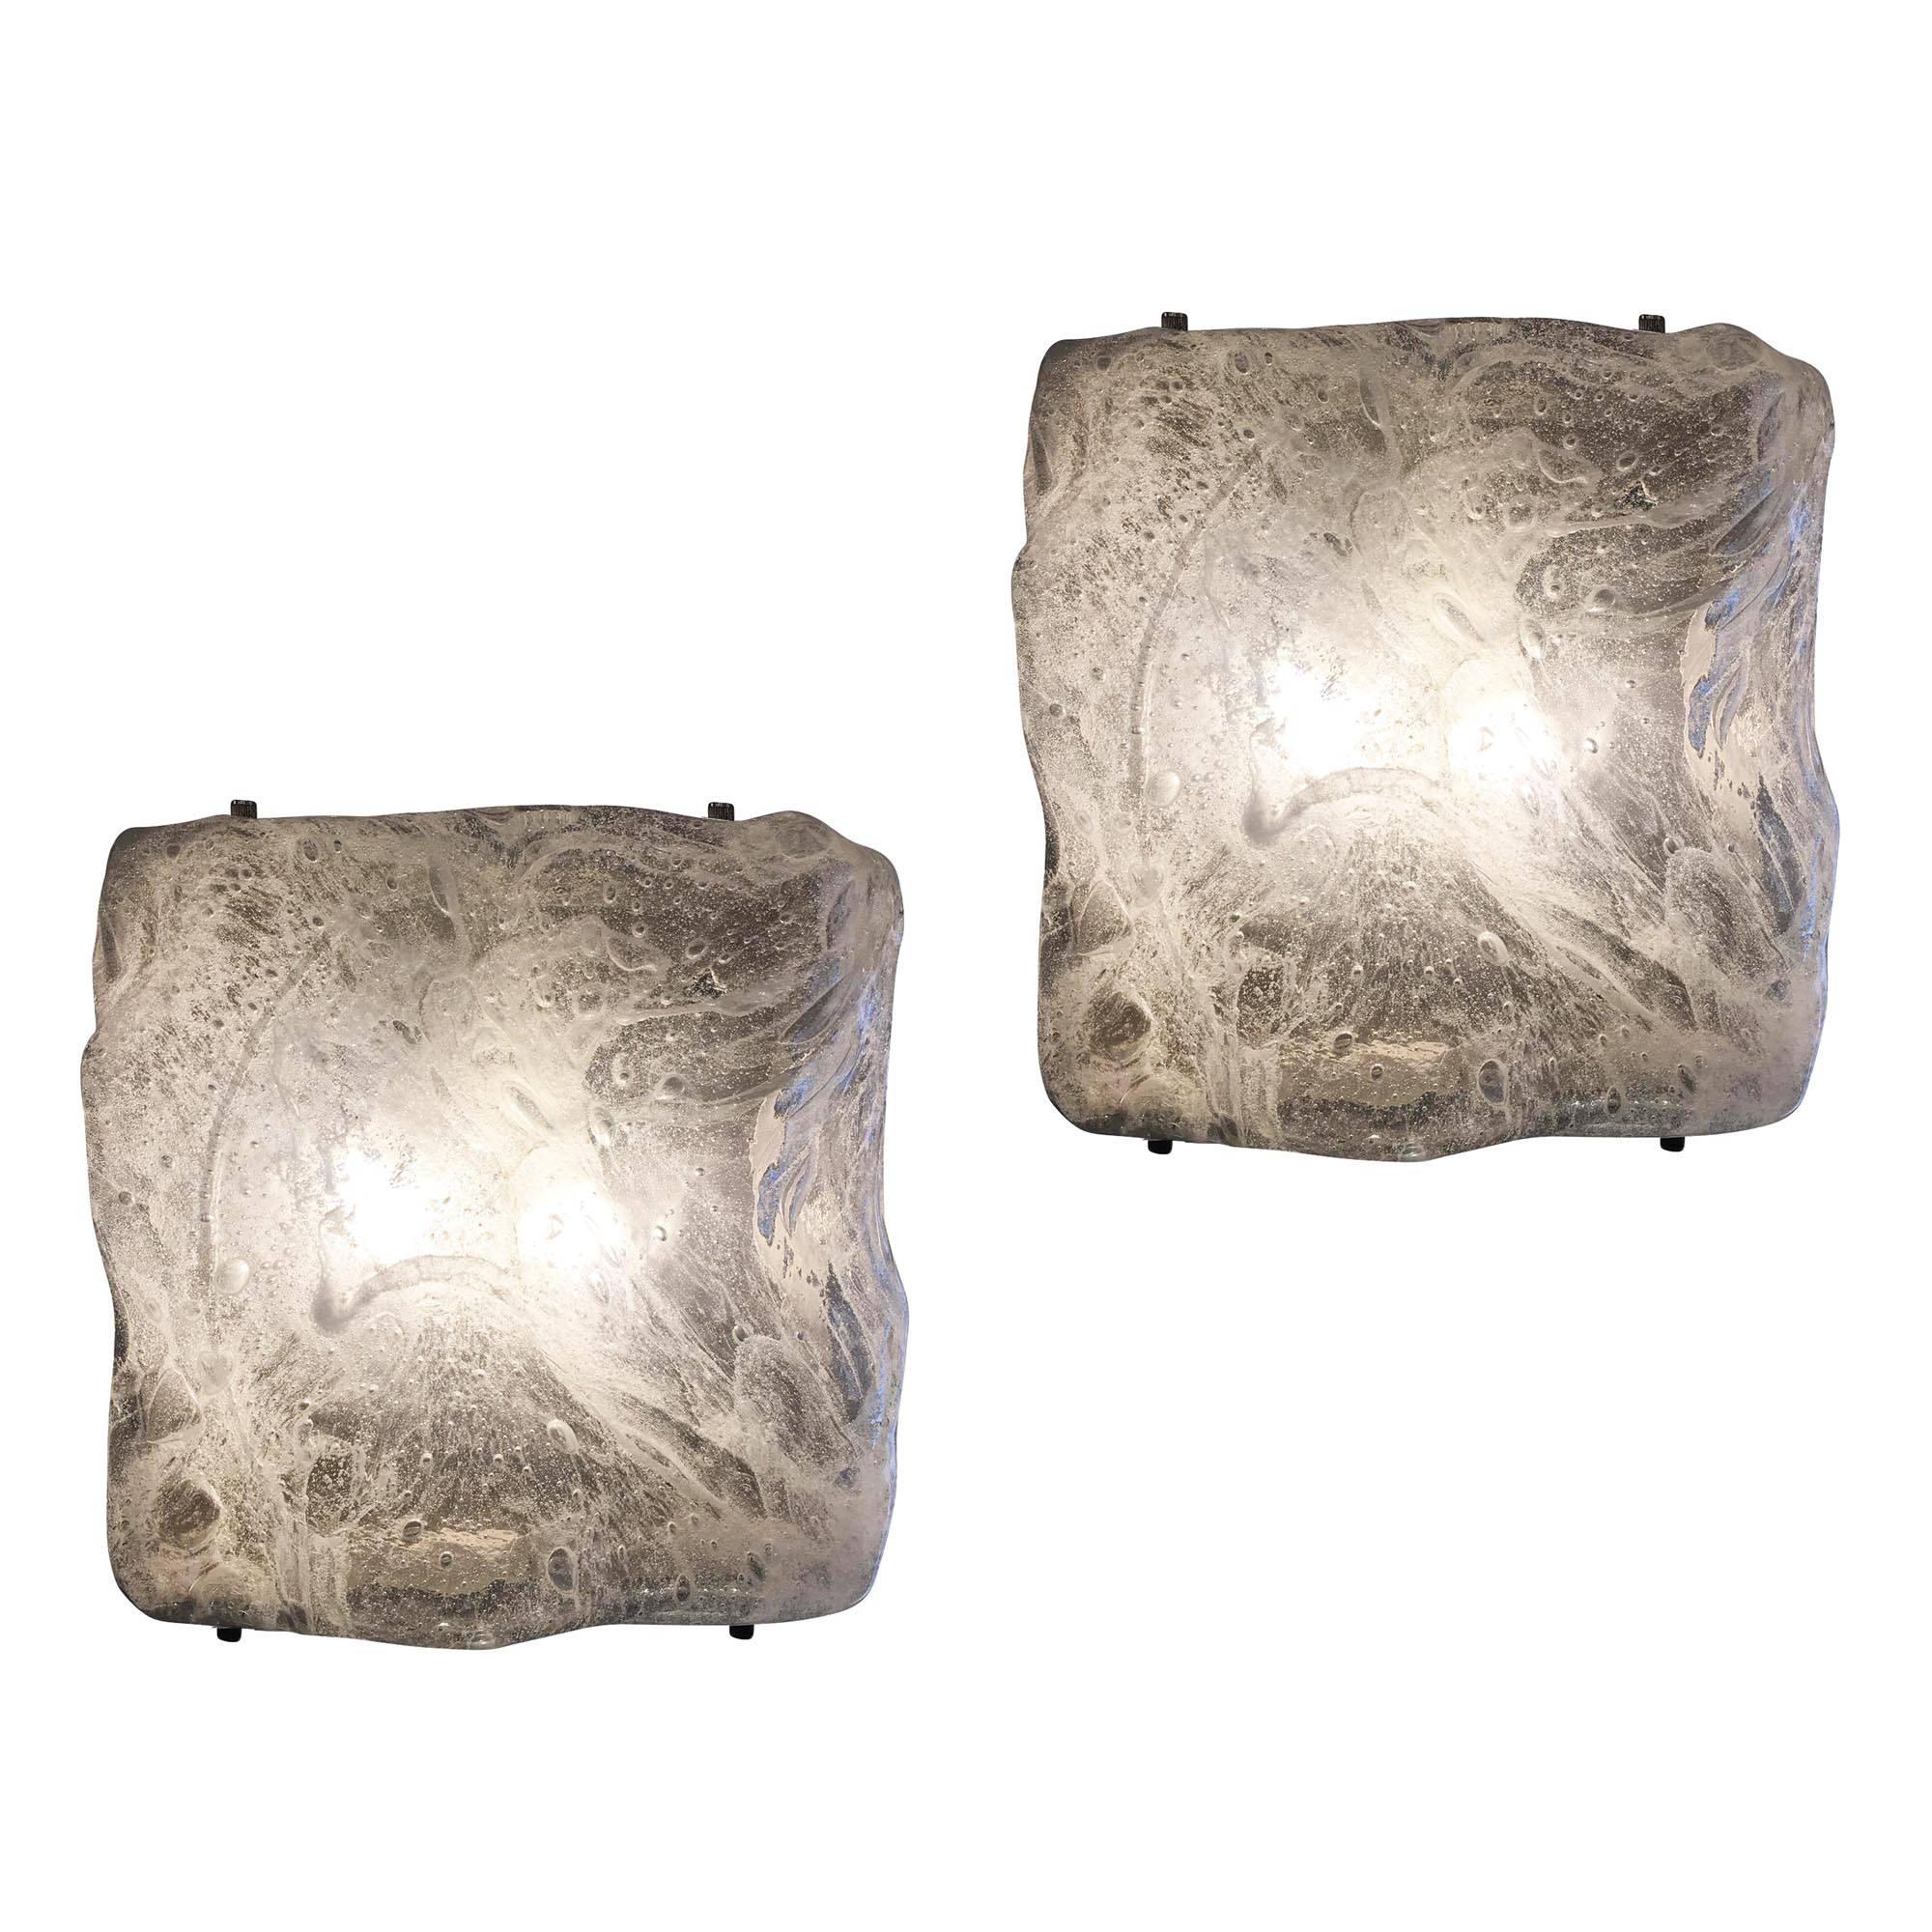 Organically styled wall lights made by Poliarte. The undulating clear glass is textured with infused bubbles and white striations. The hardware is metal. Can be also used as flush mount ceiling lights. A single larger one is also available. Price